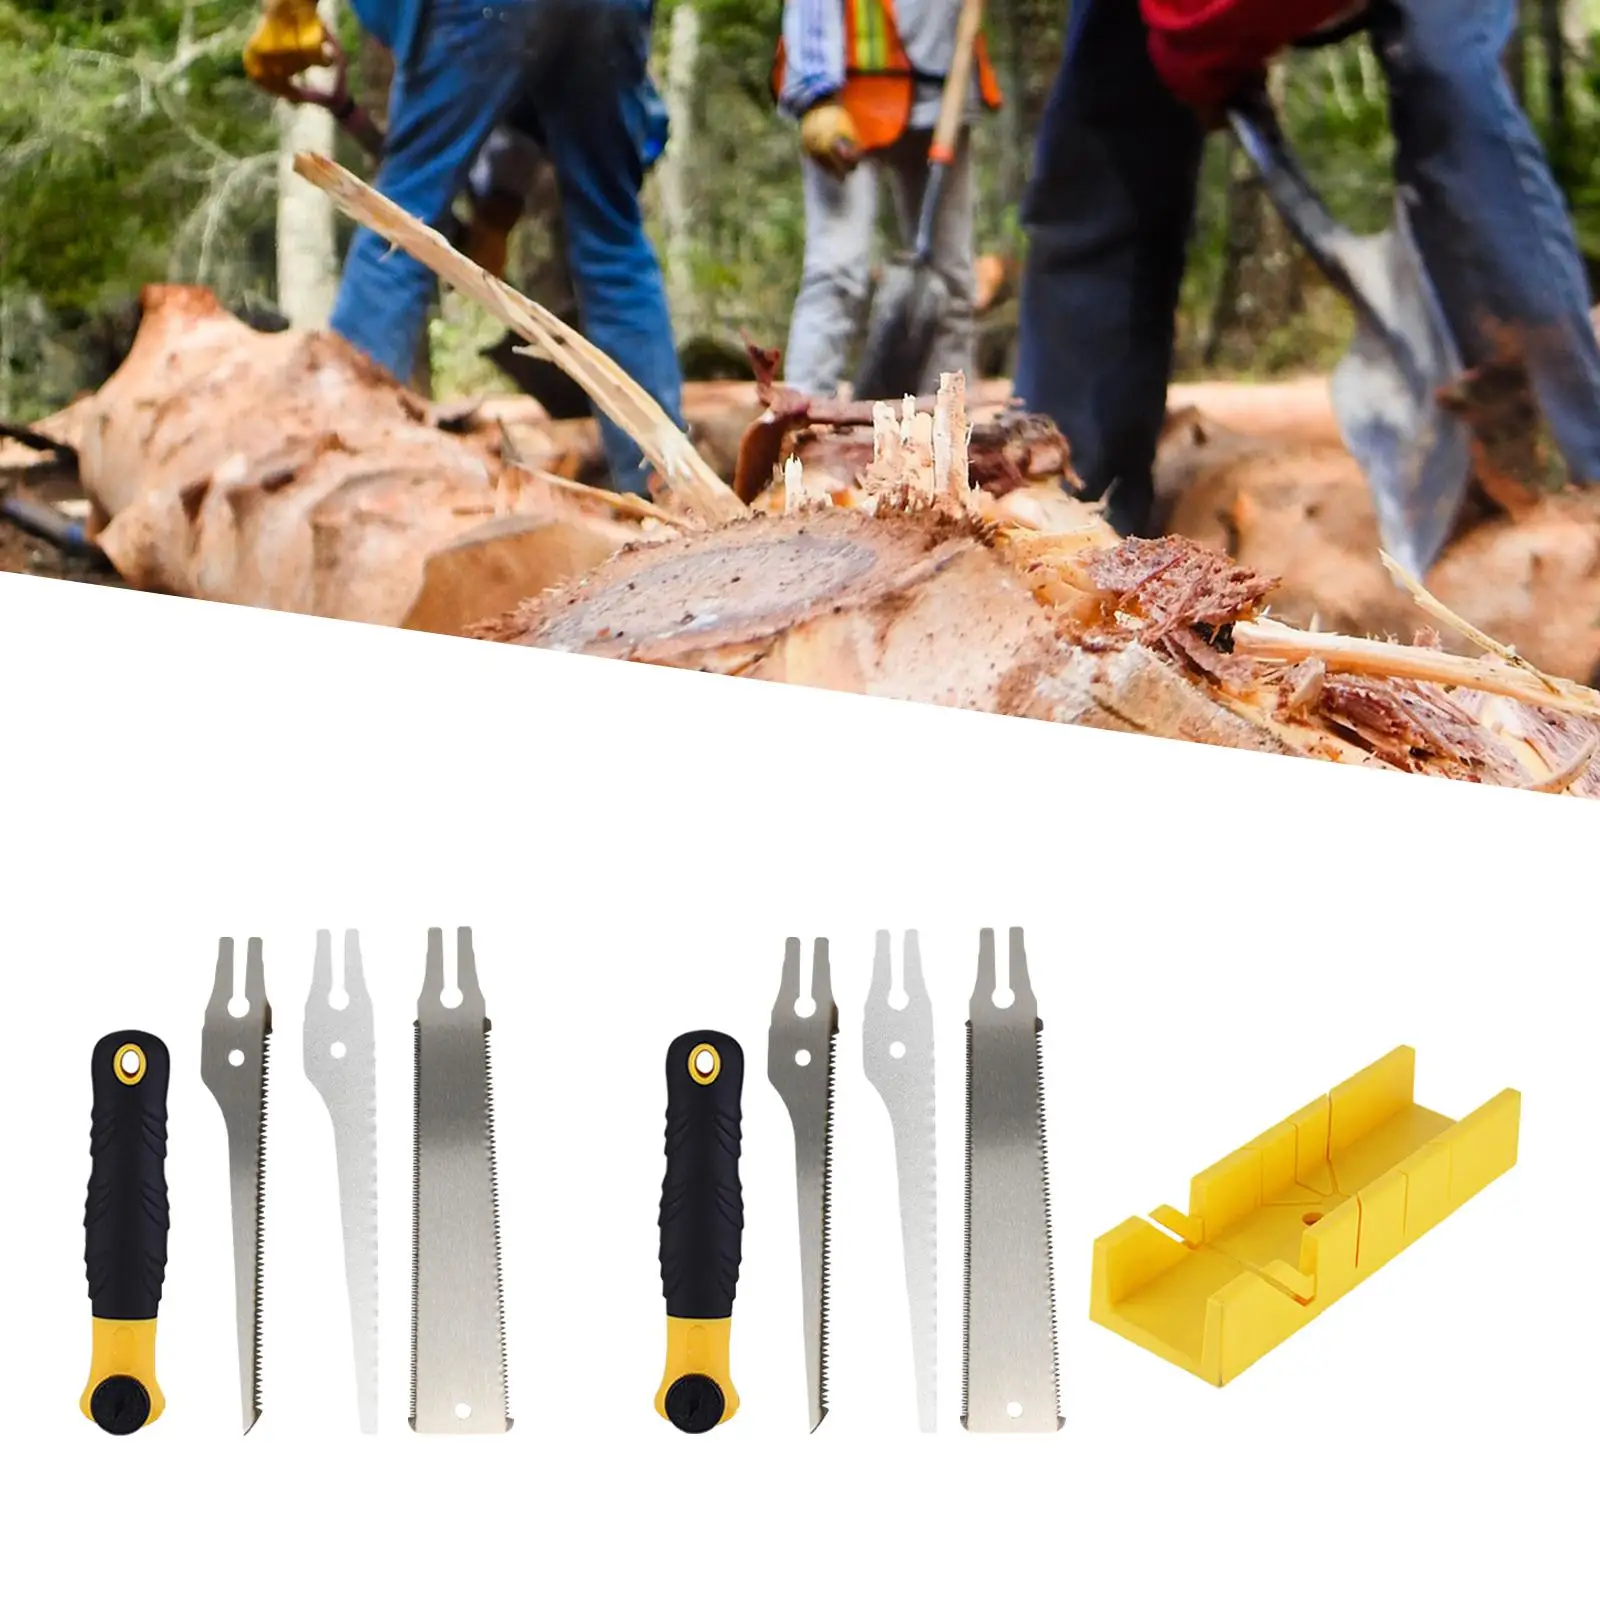 Garden Woodworking Saw Hand Tool Multifunctional Handheld Garden Tool for Cutting Trimming Branches Gardening Outdoor